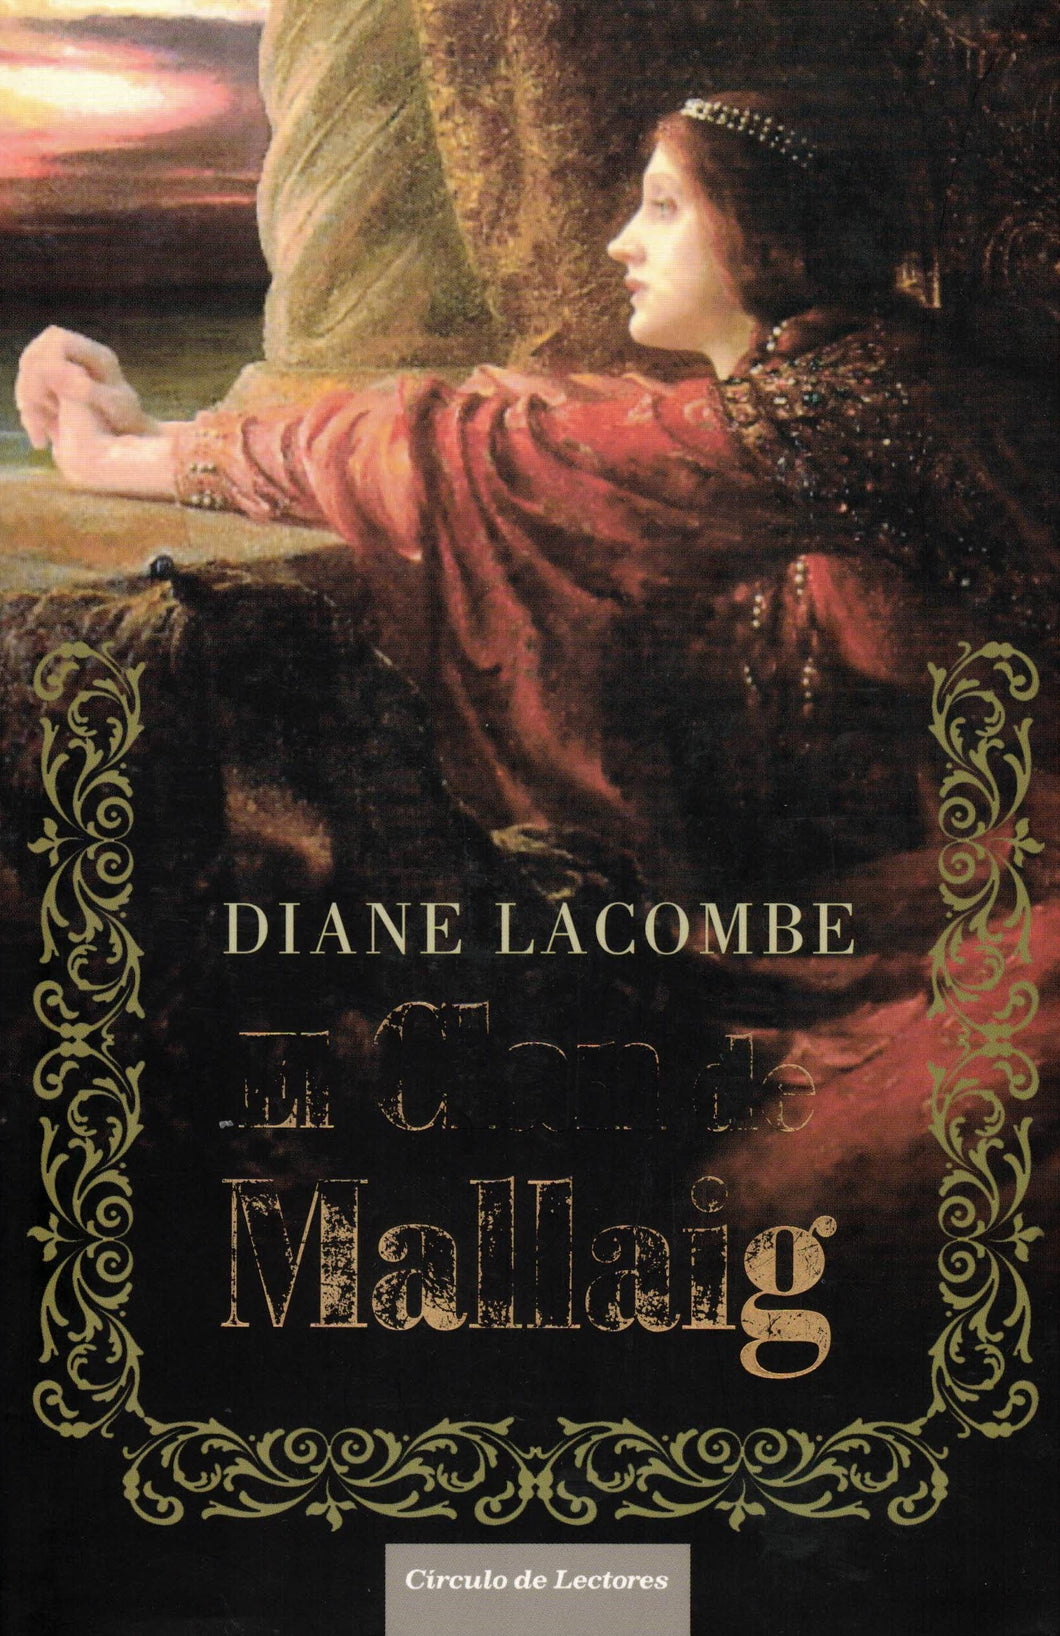 THE CLAN OF MALLAIG (BOOK) C-155 DIANE LACOMBE (good second hand)